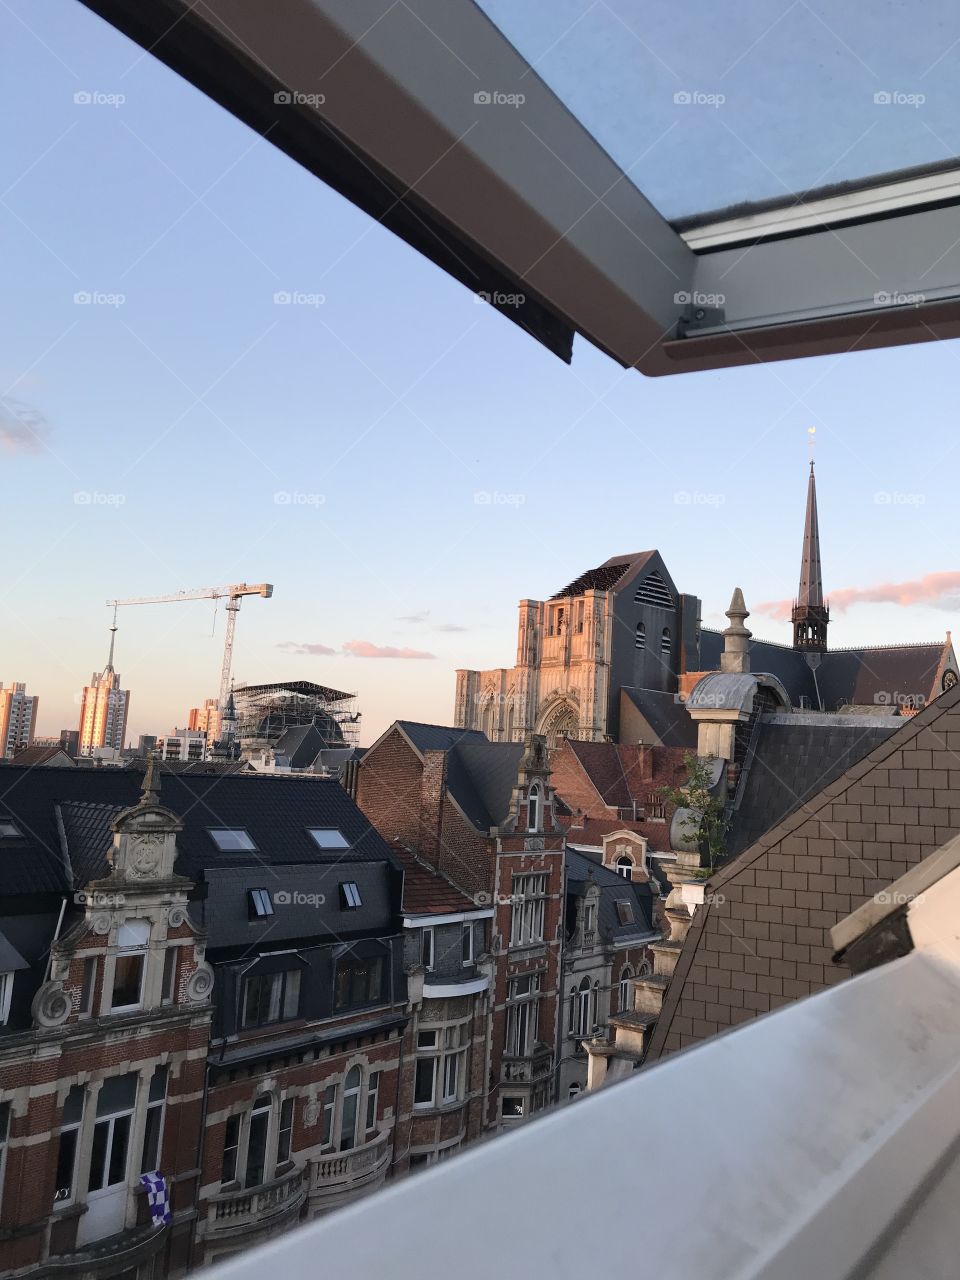 I live in Leuven, a student city in Belgium. This is the view of the cathedral from my bedroom window. 